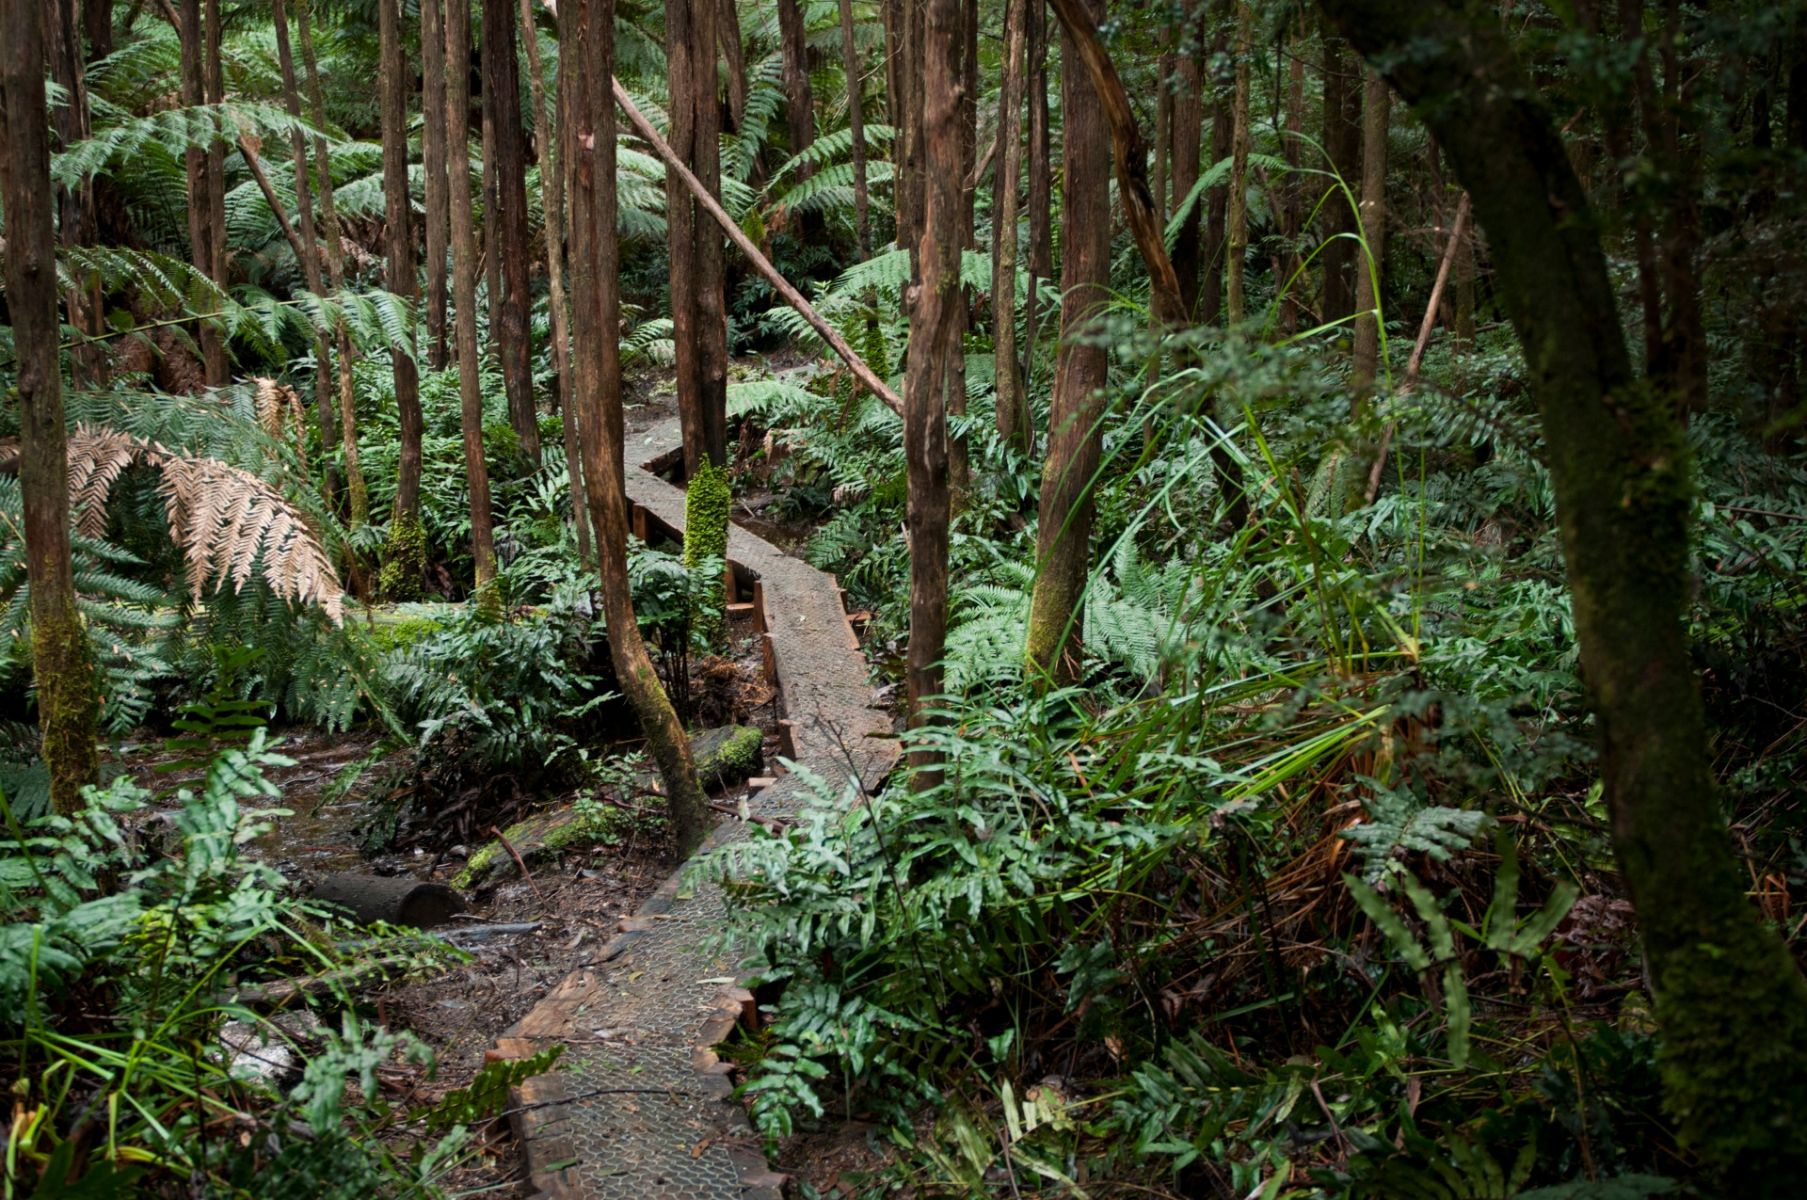 A narrow wooden walkway leads through dense forest